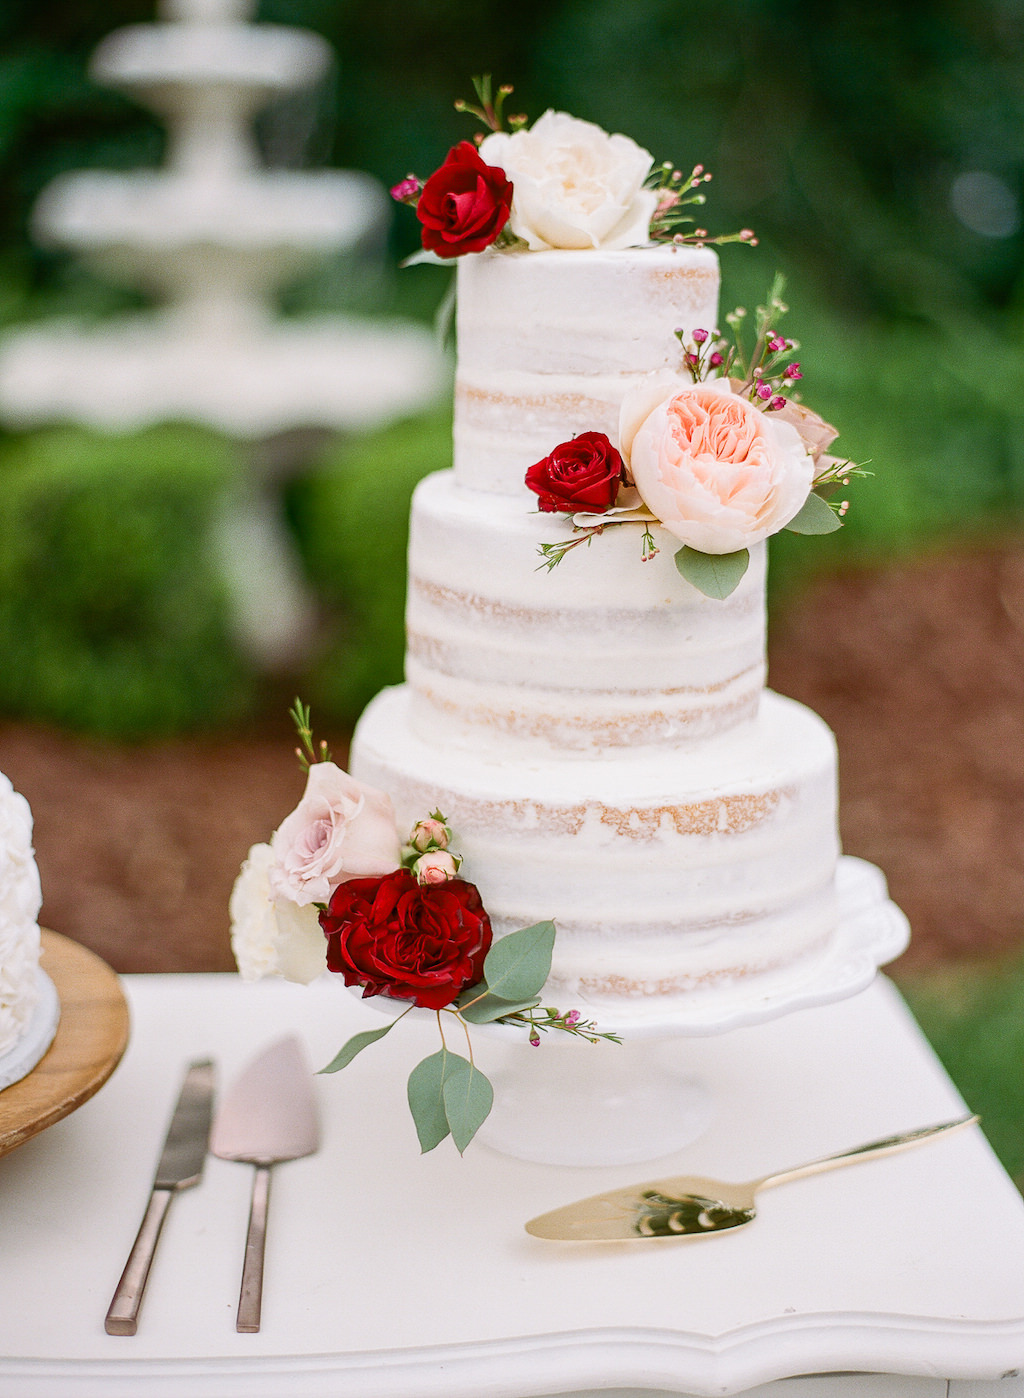 Three Tier White Semi Naked Wedding Caked with Real Blush Pink and Red Flowers